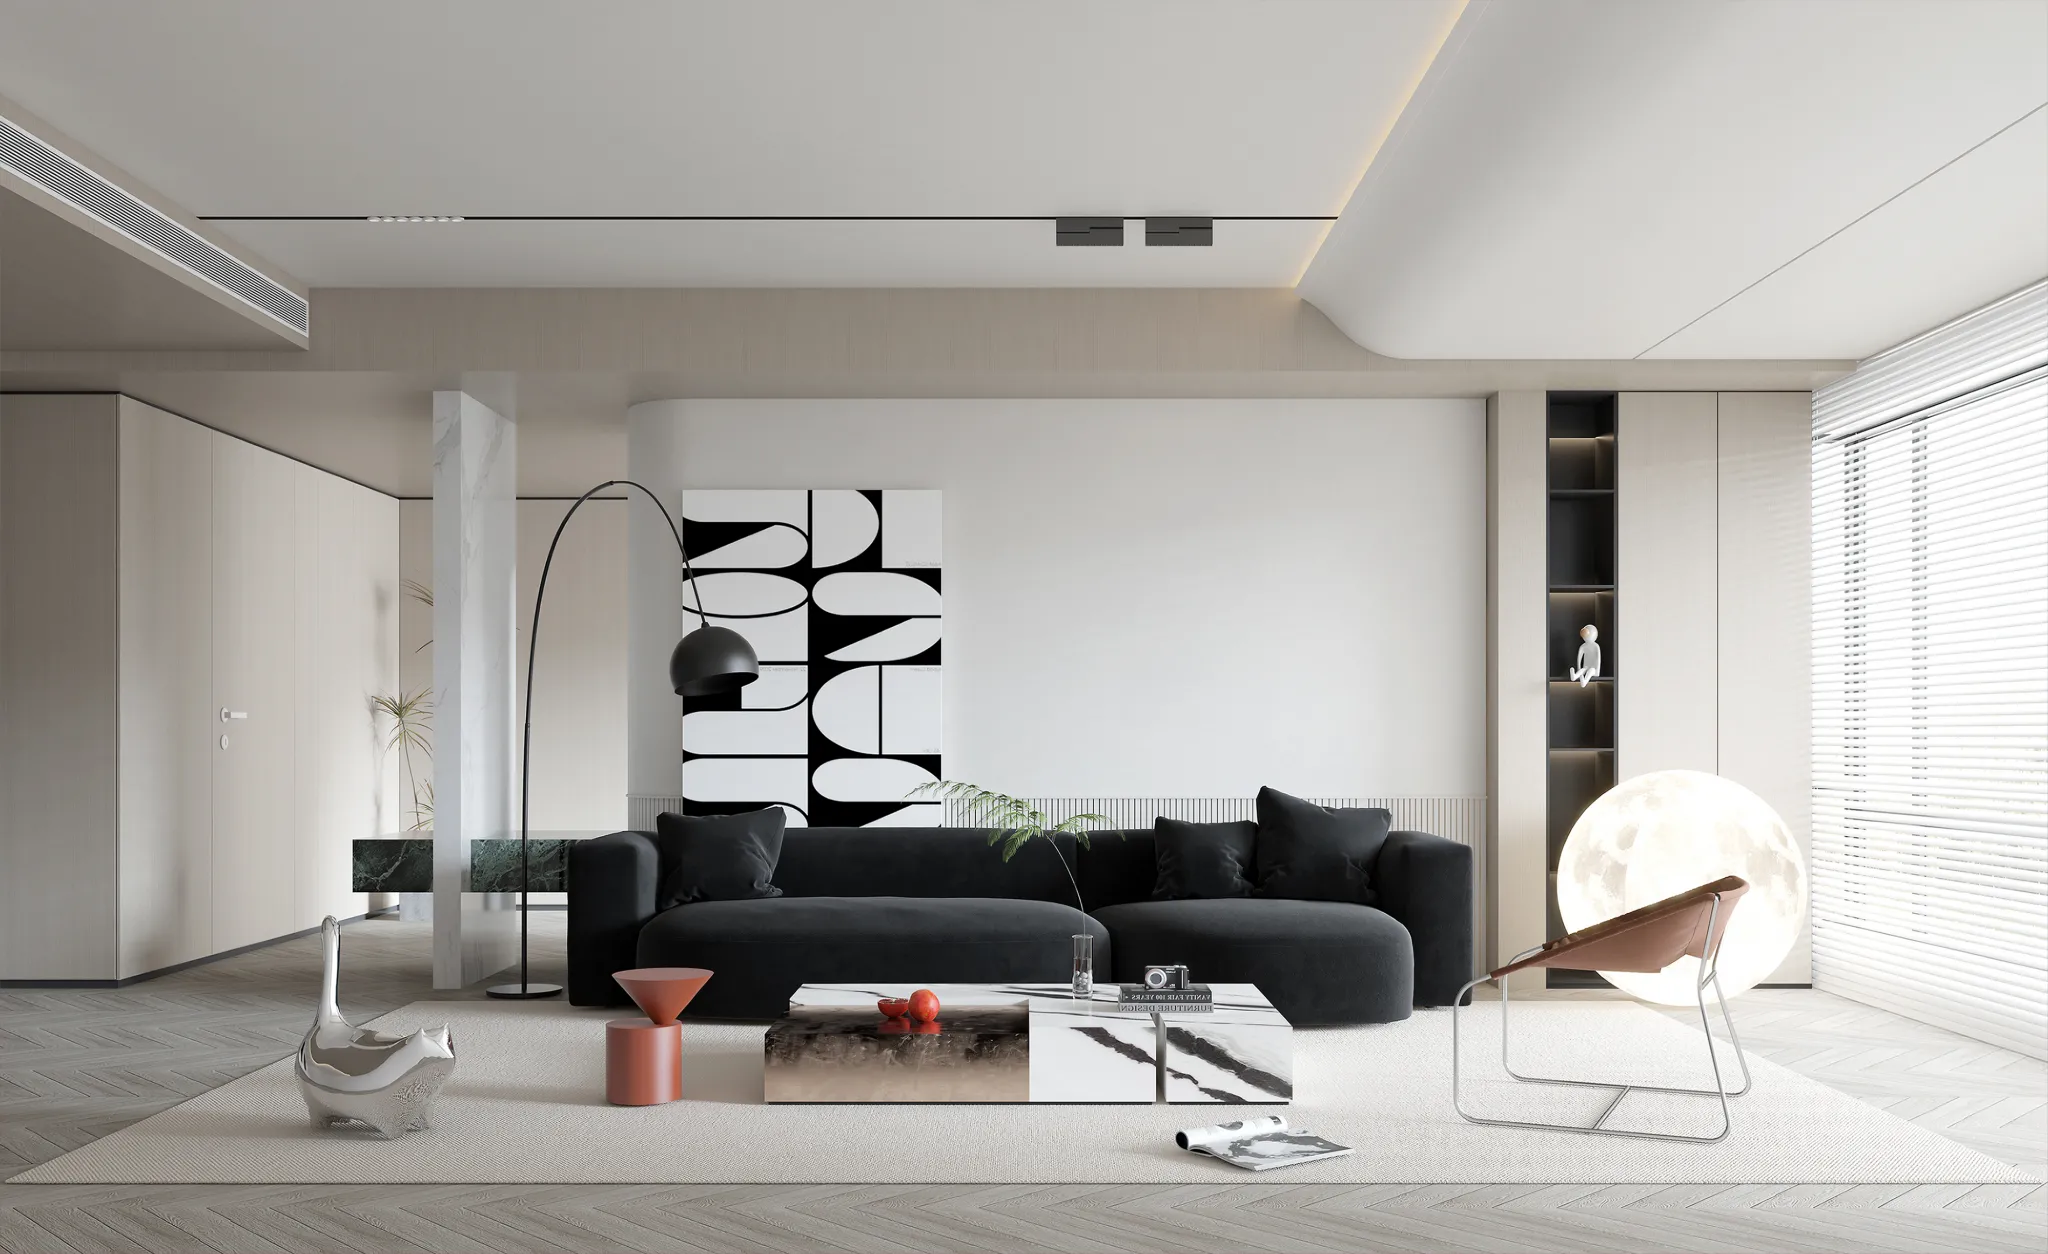 HOUSE SPACE 3D SCENES – LIVING ROOM – 0119